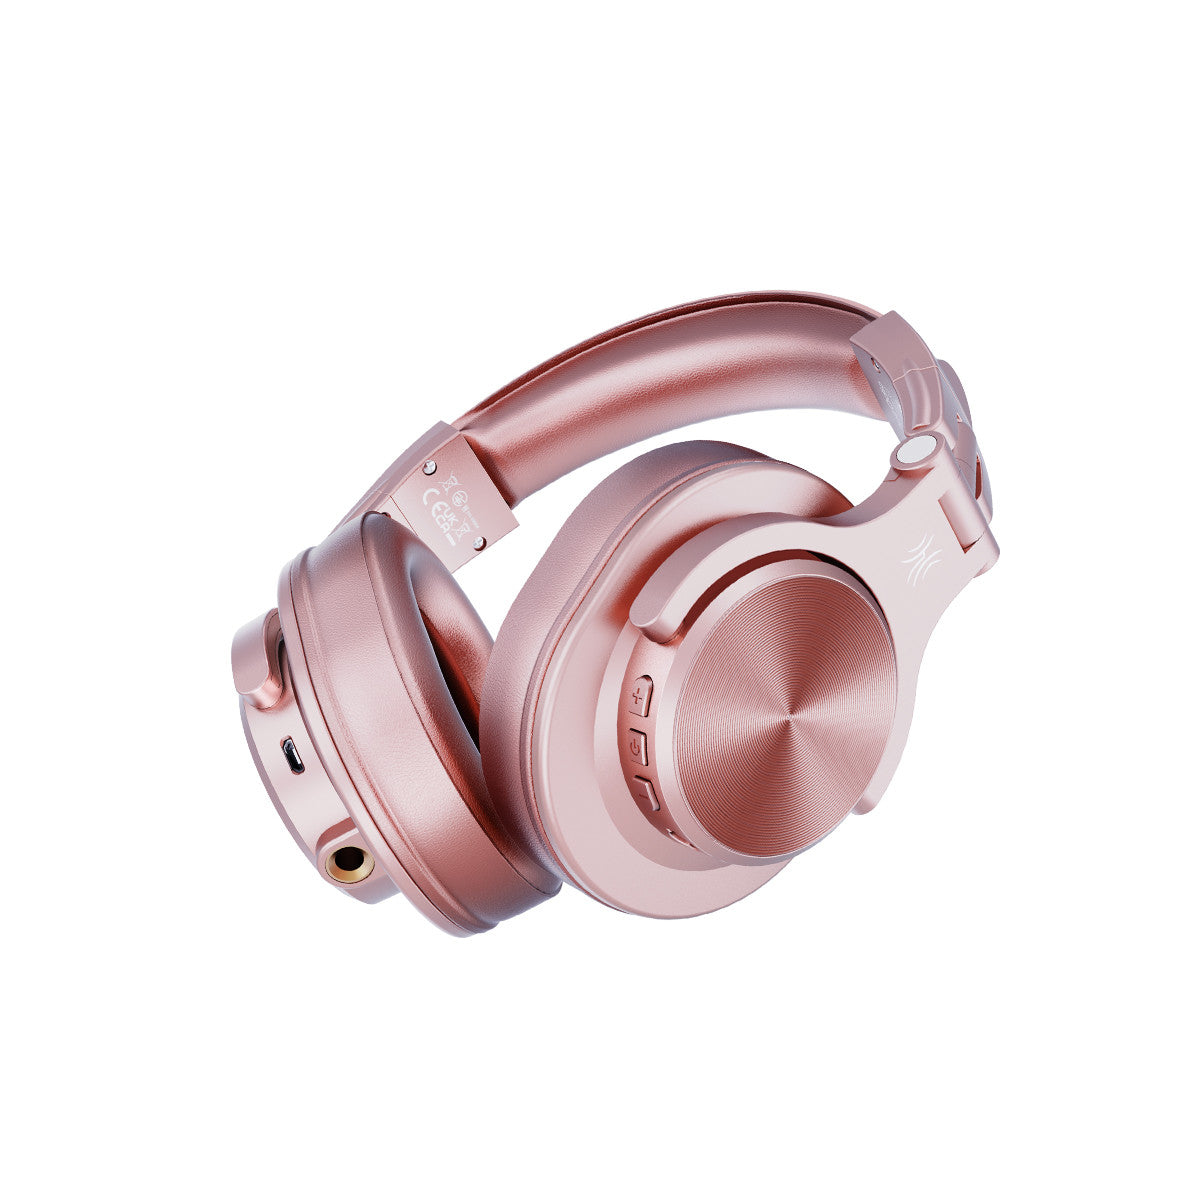 OneOdio A70 Bluetooth & Wired Headphones, Critically Acclaimed(Rose Gold)